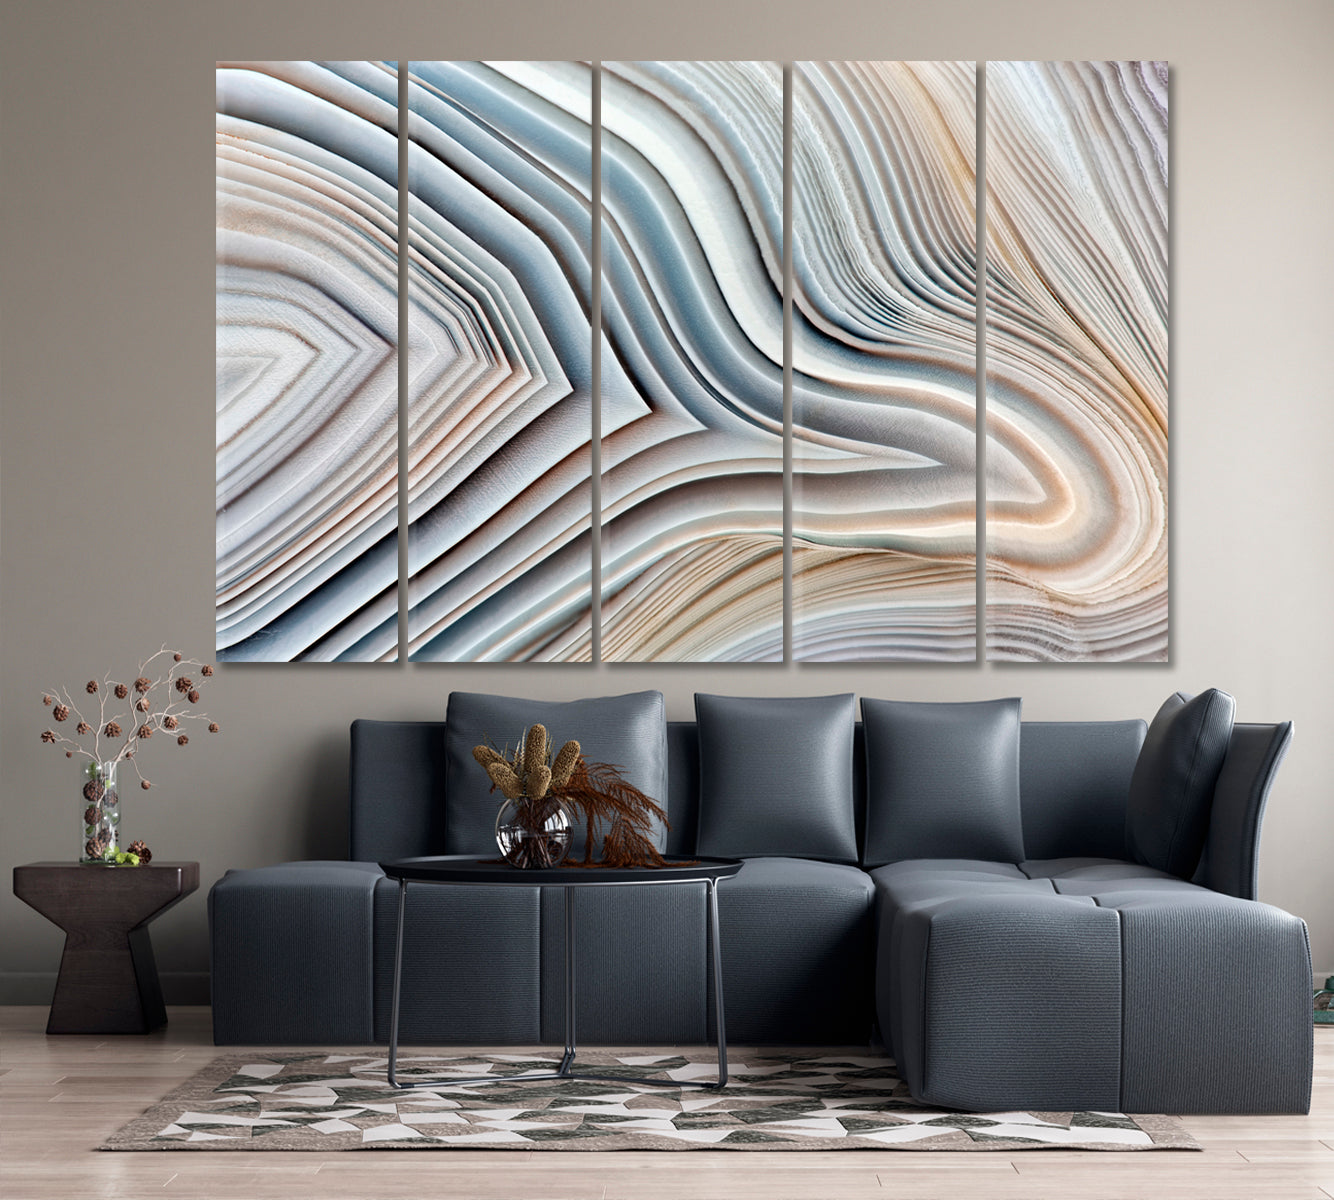 MARBLE ABSTRACT NATURALISM Amazing Agate Banded Crystal Fluid Art, Oriental Marbling Canvas Print Artesty 5 panels 36" x 24" 